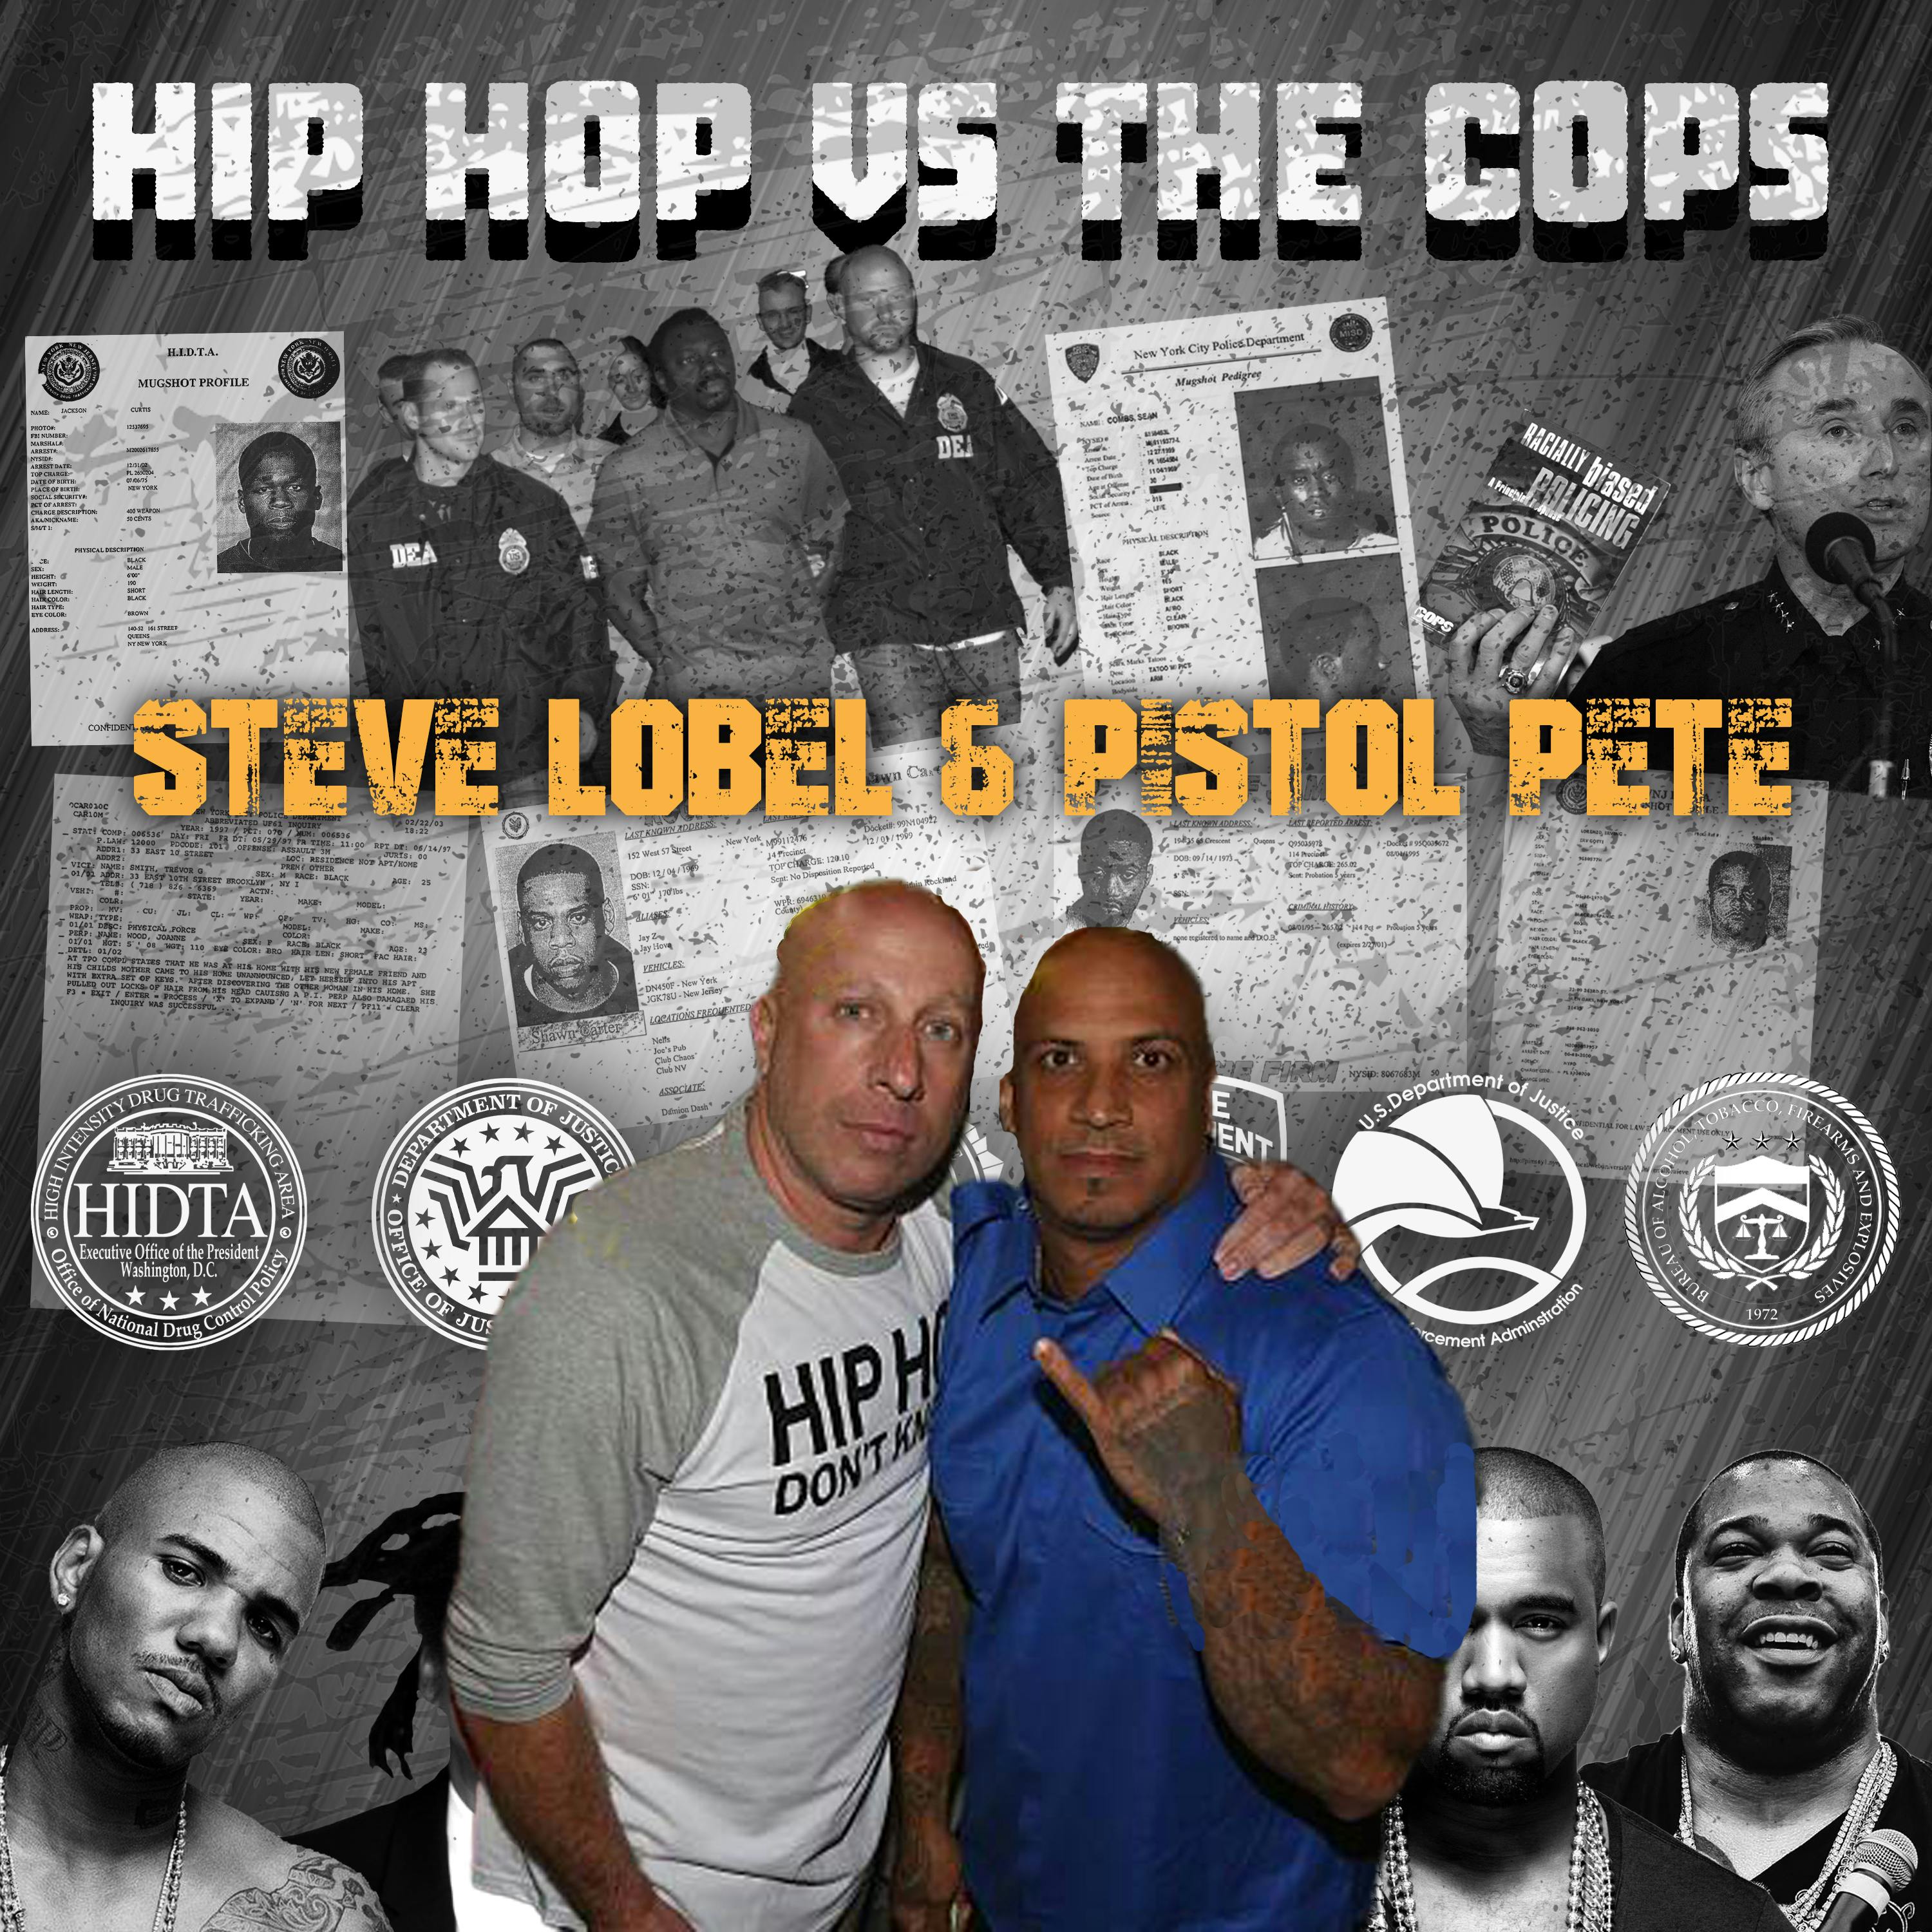 HIP HOP VS THE COPS EP. 2: THE HUNT IS ON!